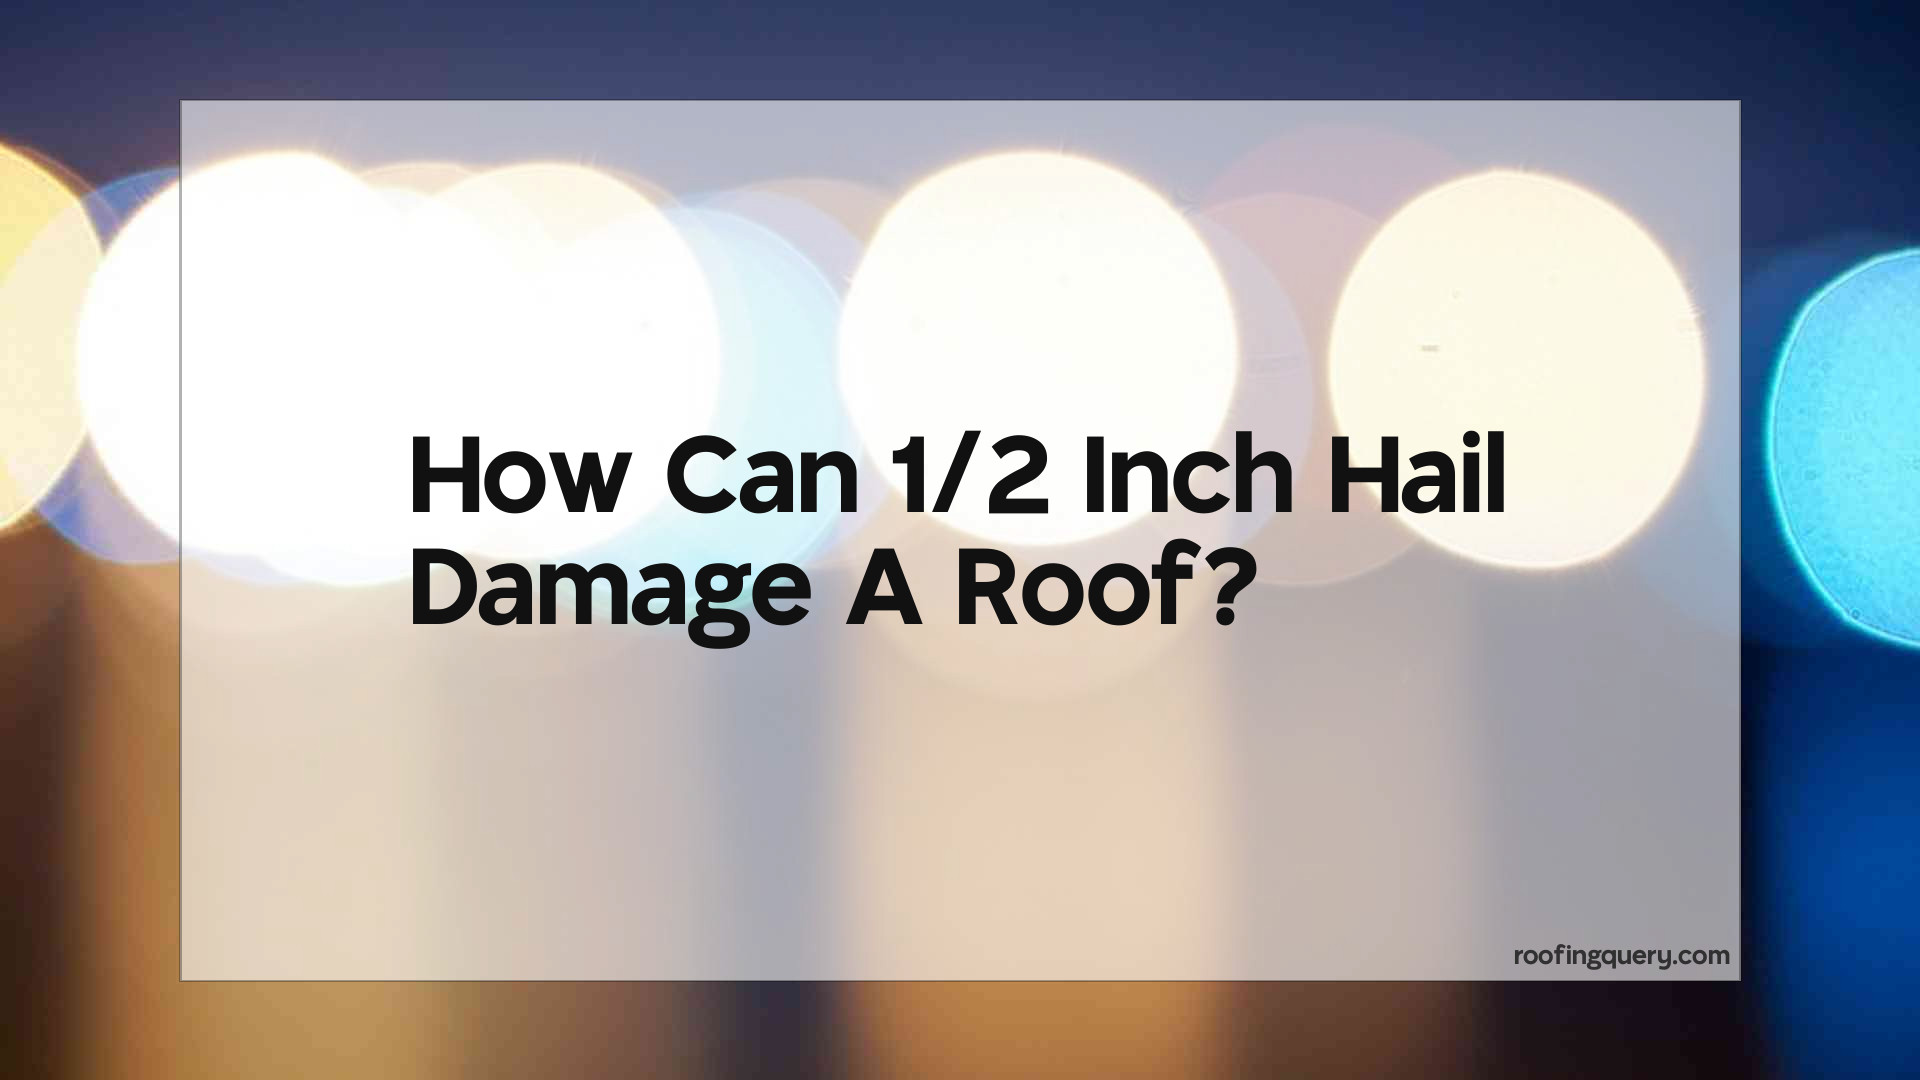 Can 1/2 Inch Hail Damage A Roof